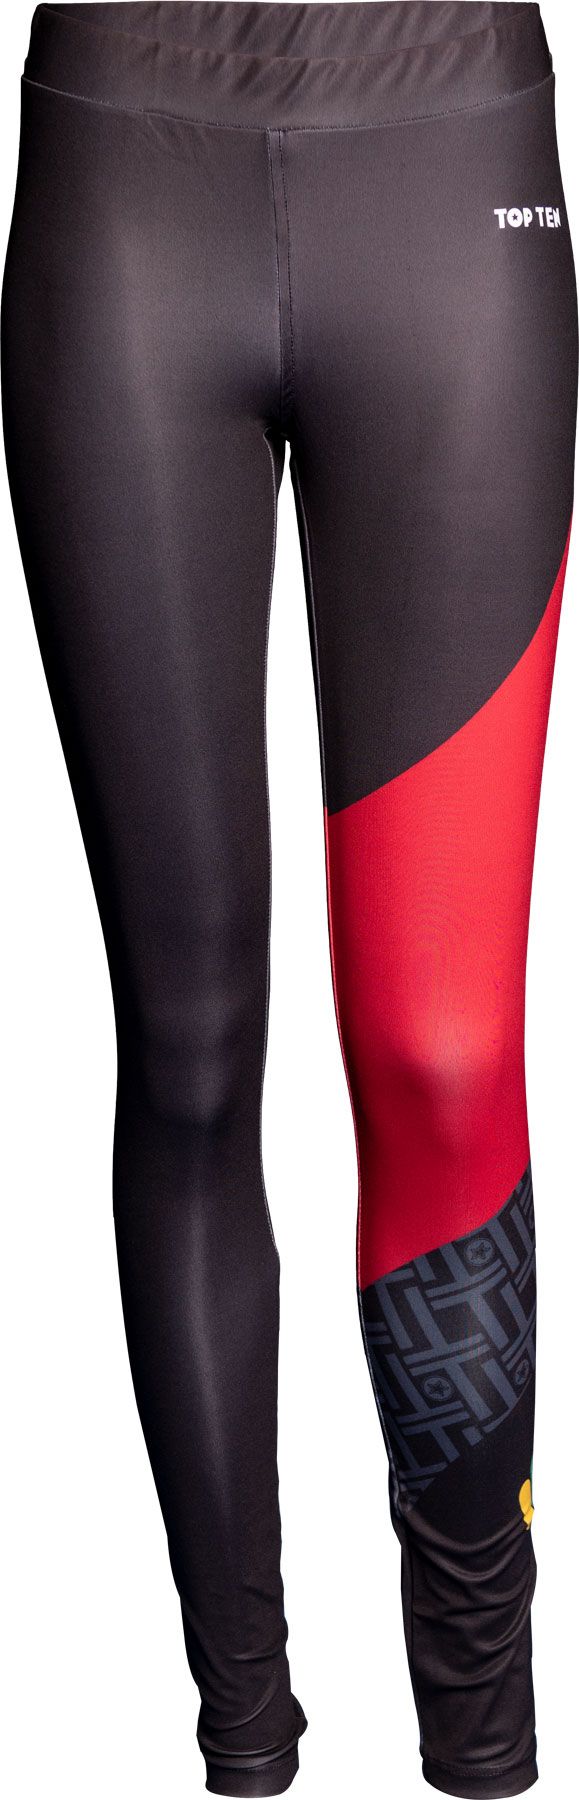 TopTen workout leggings ITF - ray